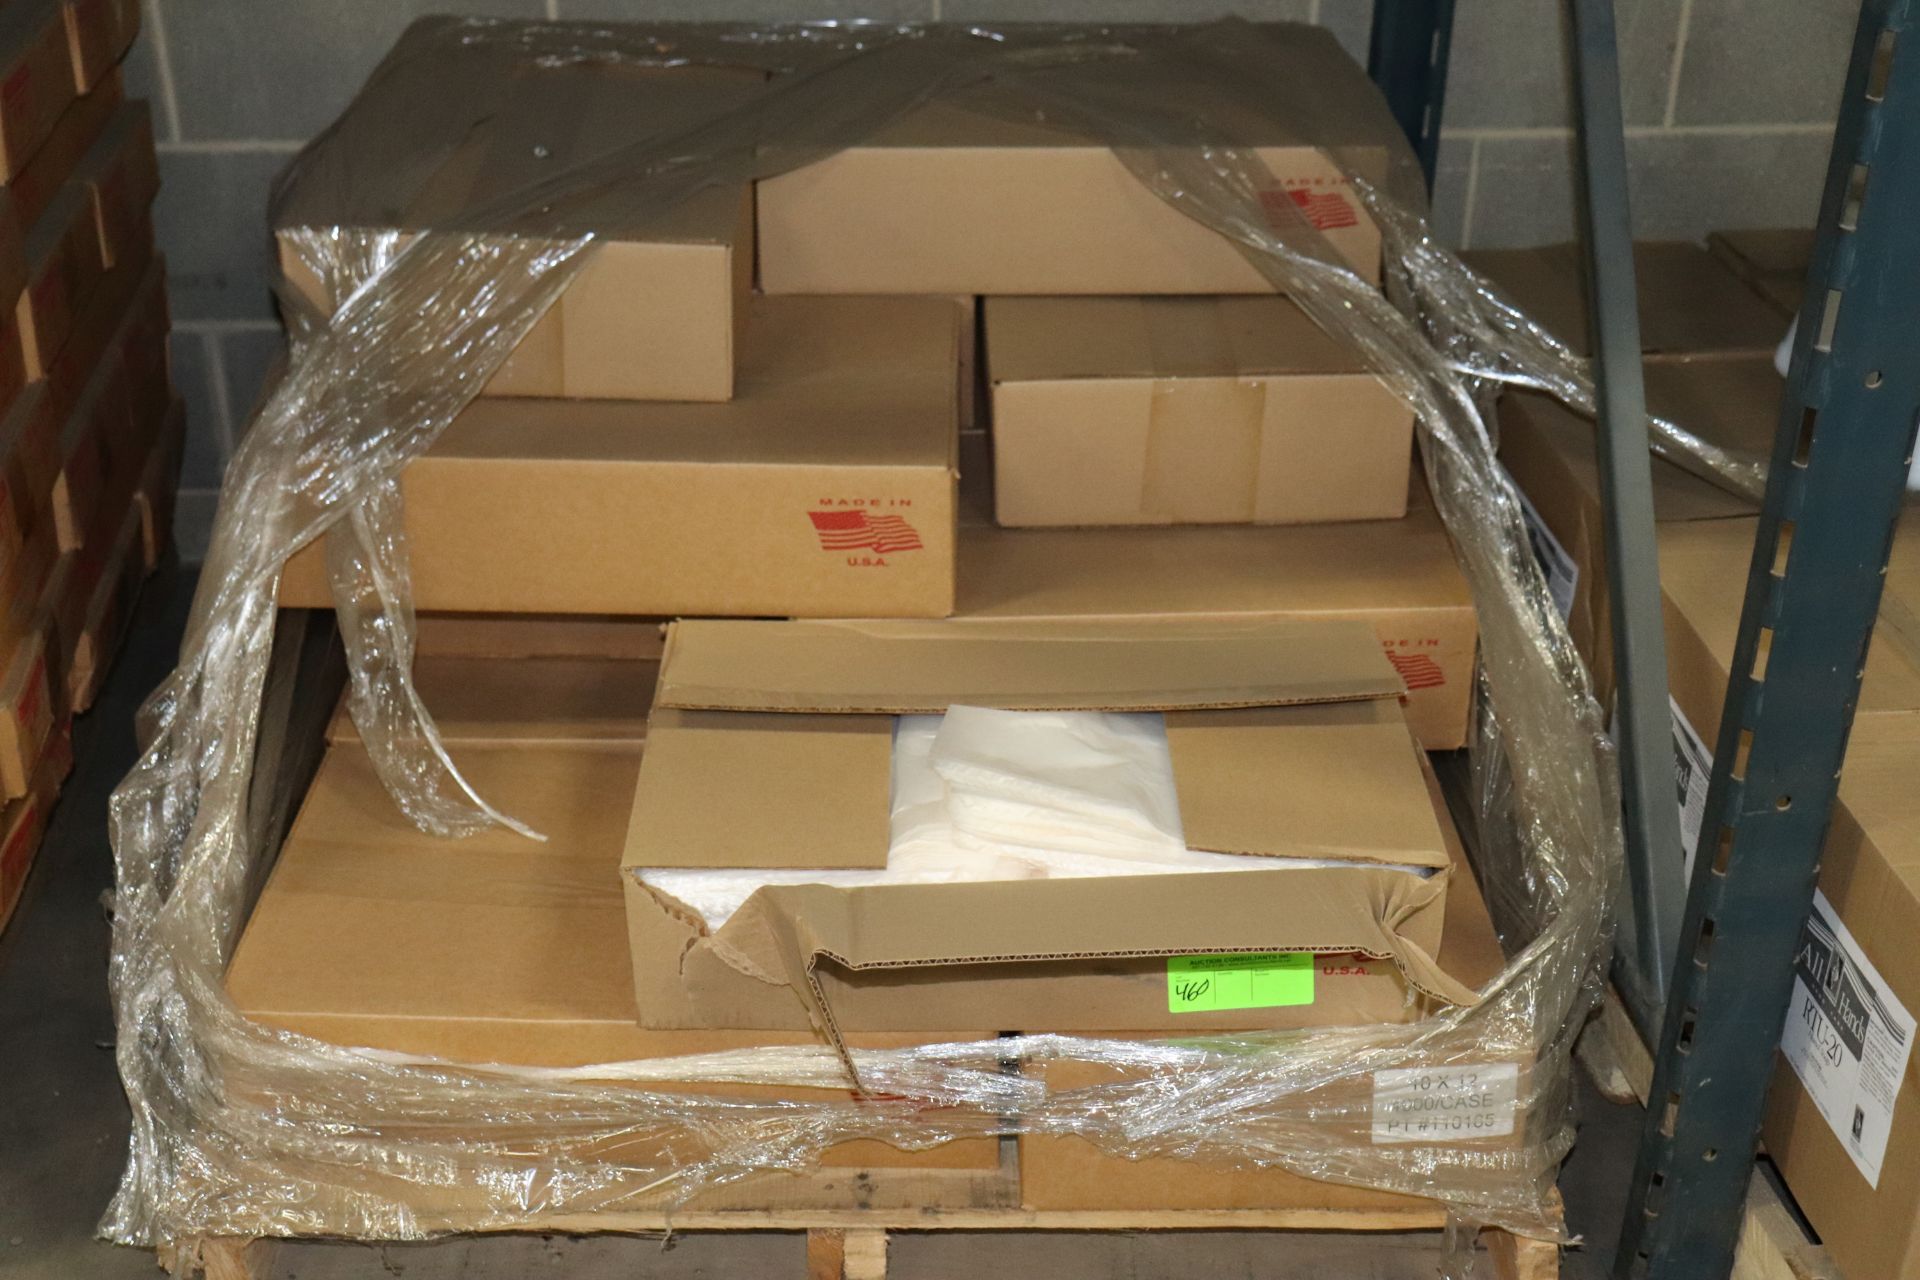 Pallet of bags, 10" x 12", 4,000 per case, approximately 11 boxes